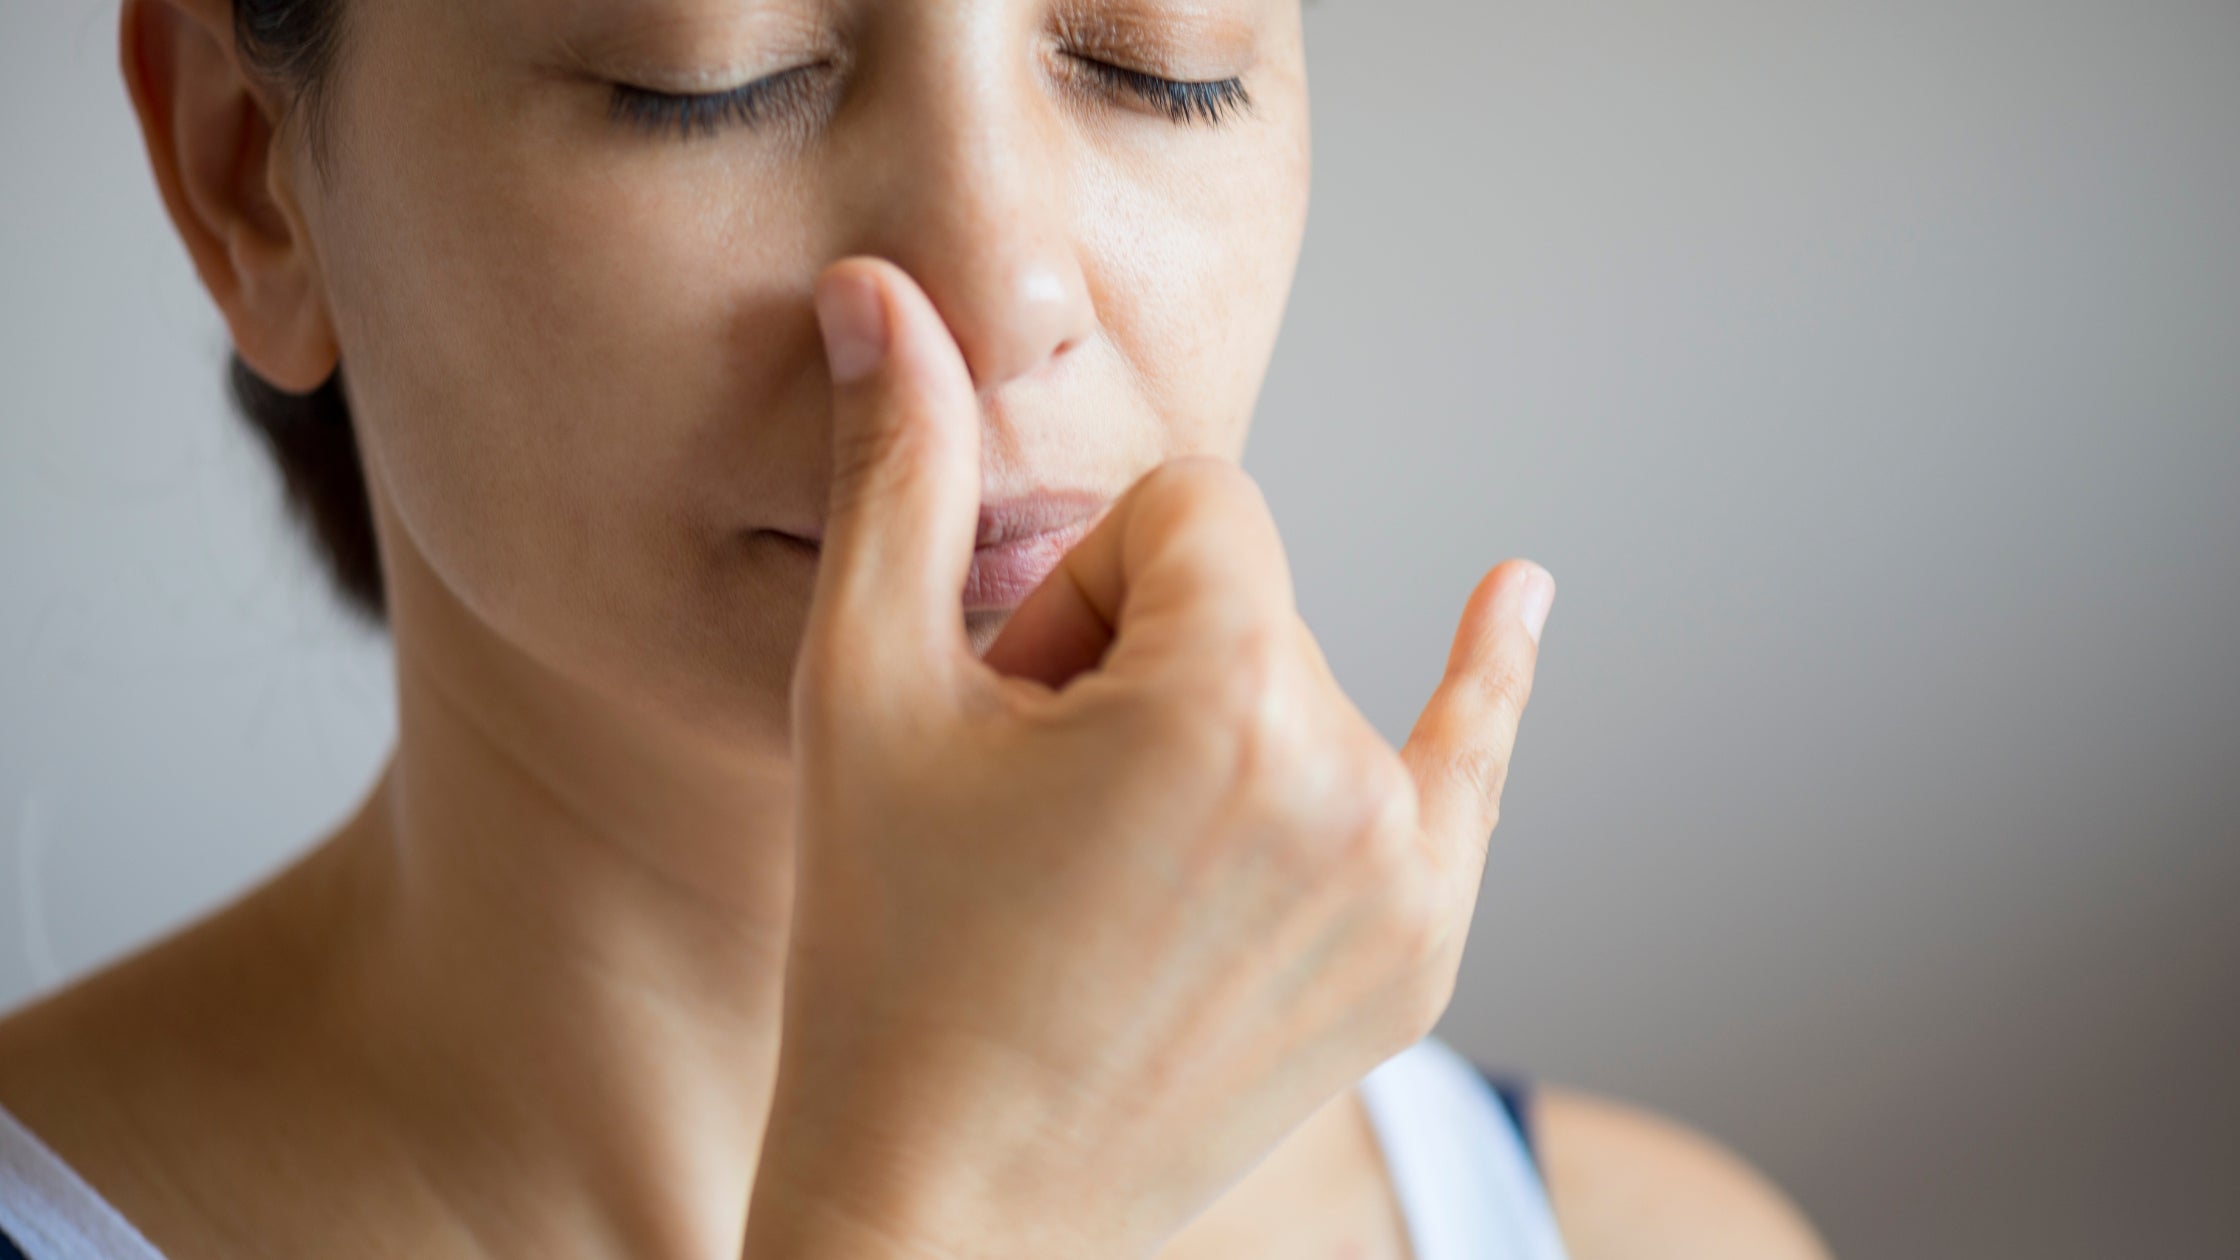 Does COPD Affect the Nose and breathing